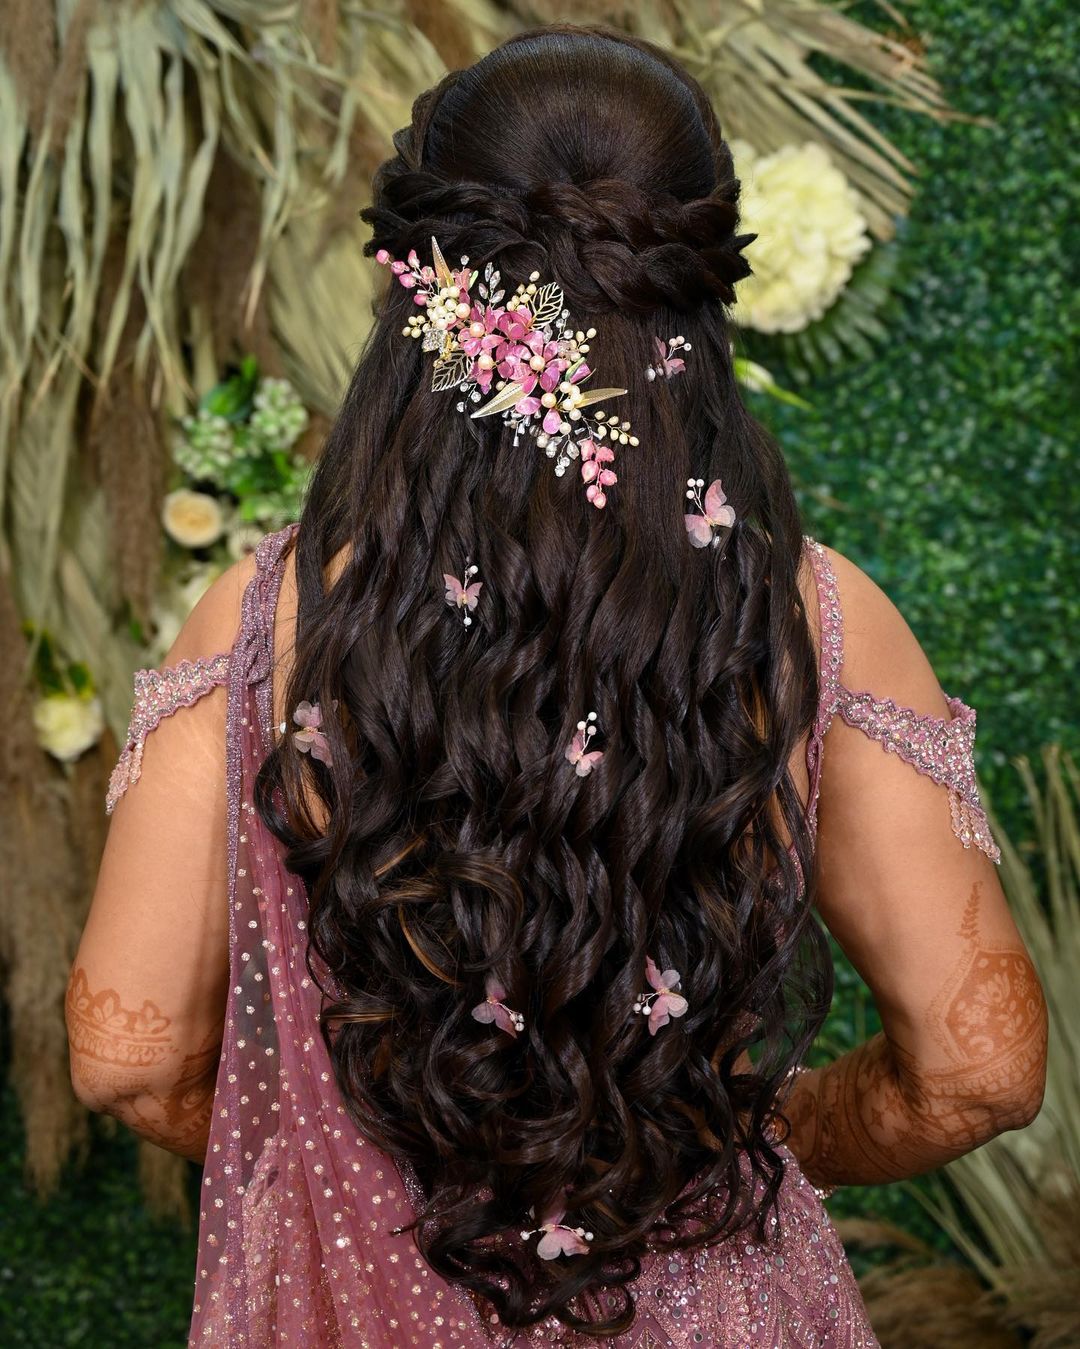 The Best Hairstyles To Wear With A Tiara To Feel Like A Princess | Jiji Blog